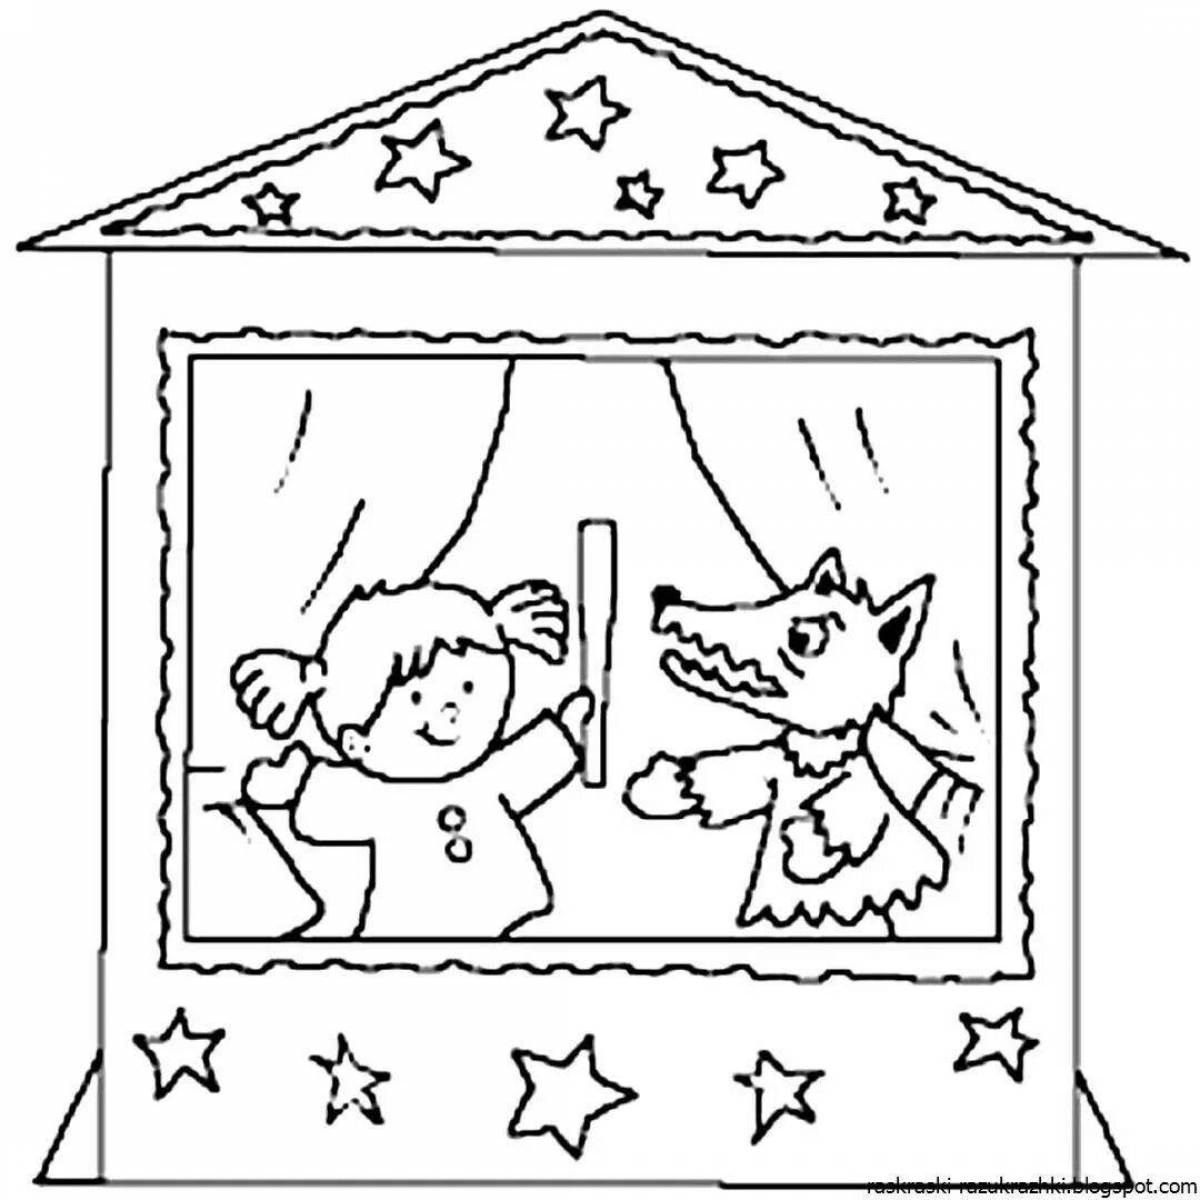 Coloring page fascinating puppet theater